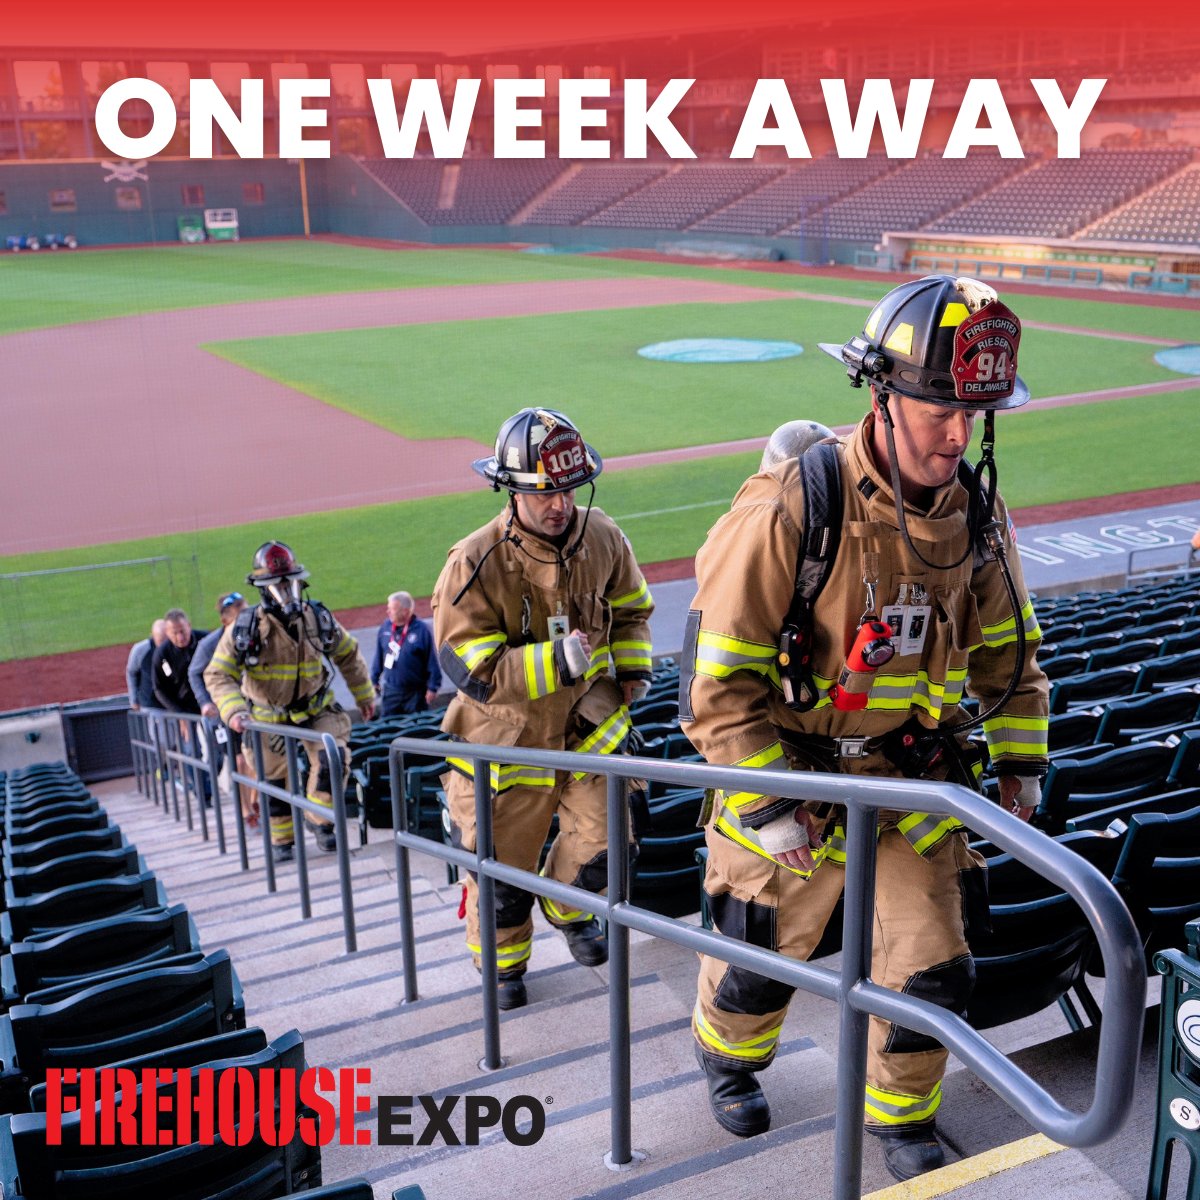 It's almost time! ⏰ There is still time to register to attend this world-class conference & expo with incredible exhibitors and speakers, opportunity to network within the fire community, and much more. We'll see you next week! Register - bit.ly/3qYJs1D #FHExpo23